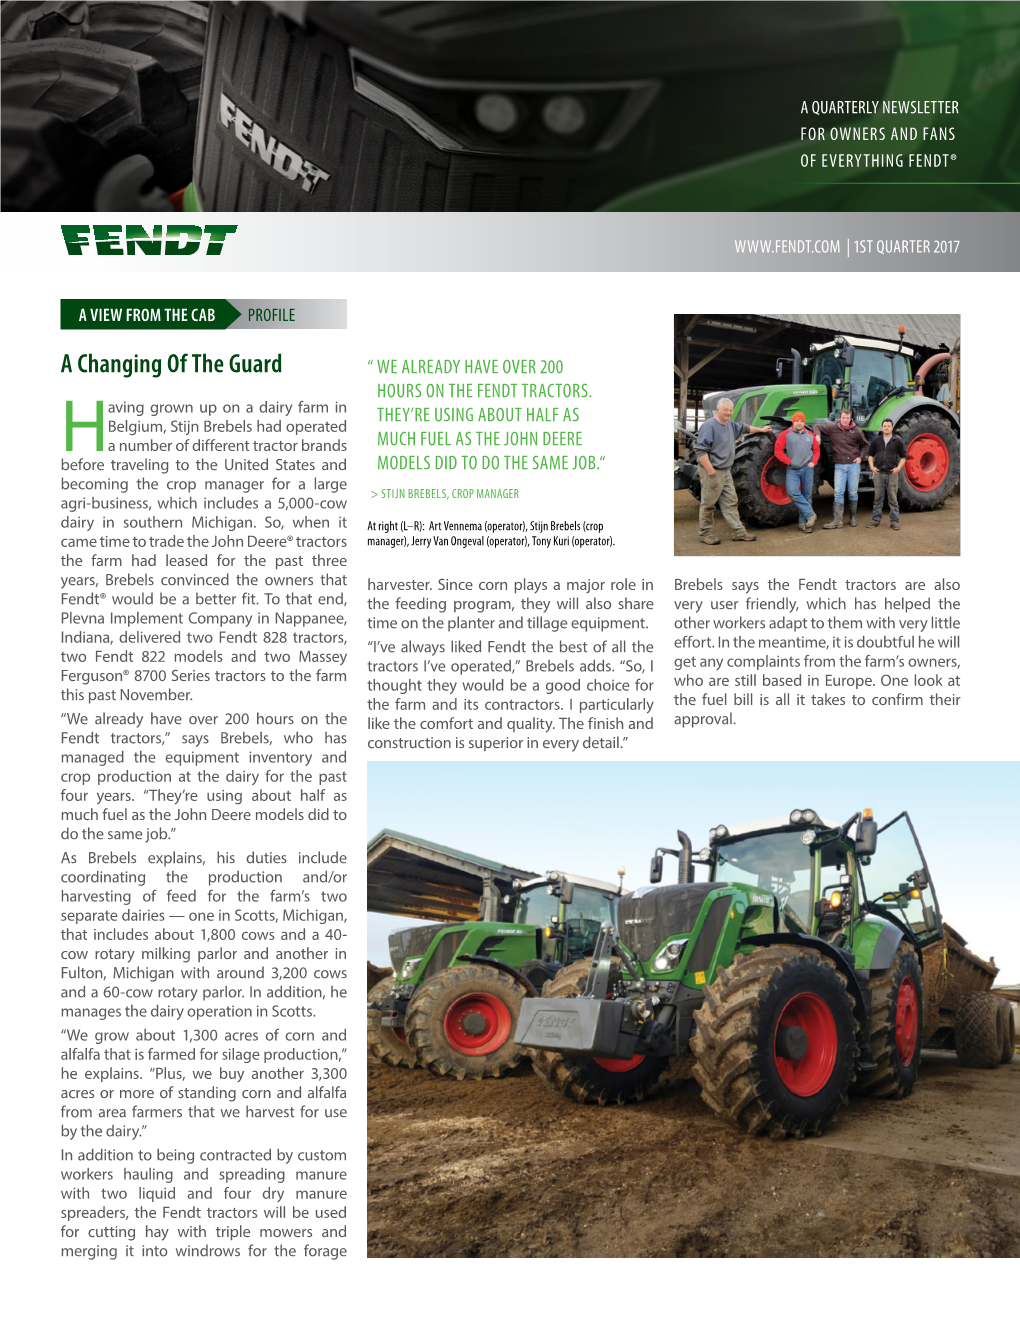 A Changing of the Guard “ WE ALREADY HAVE OVER 200 HOURS on the FENDT TRACTORS